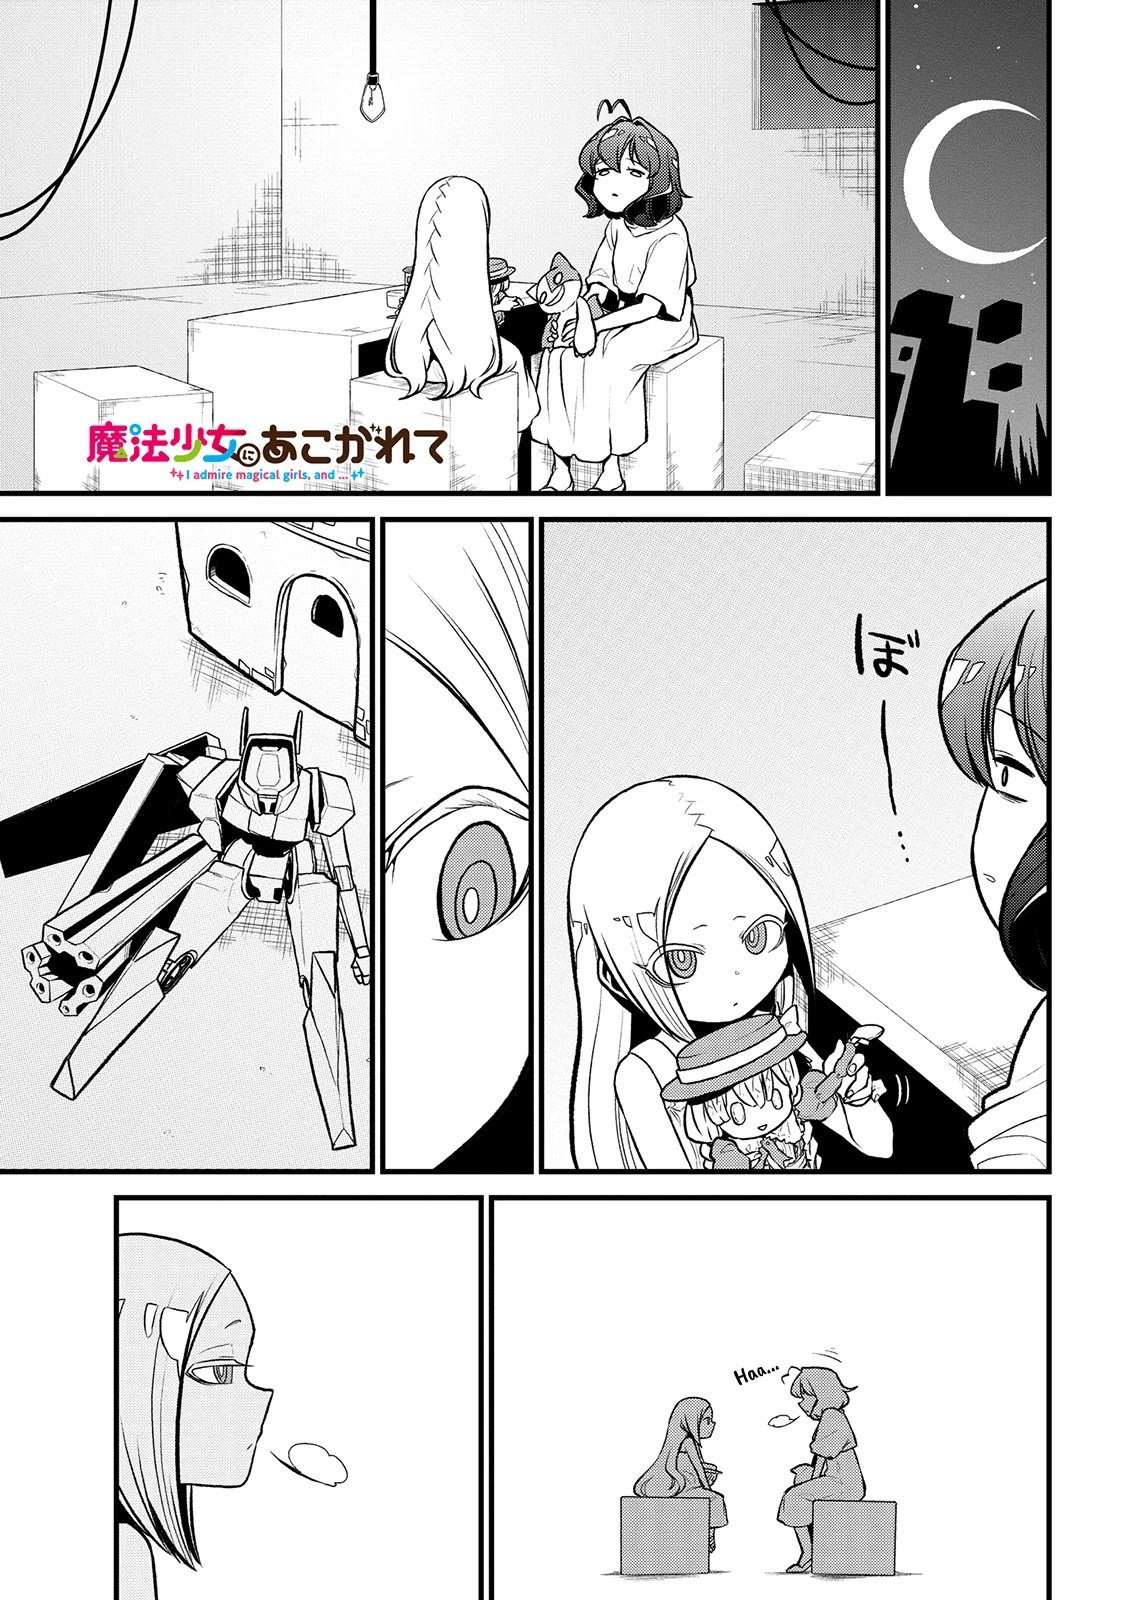 Looking up to Magical Girls - chapter 26 - #1